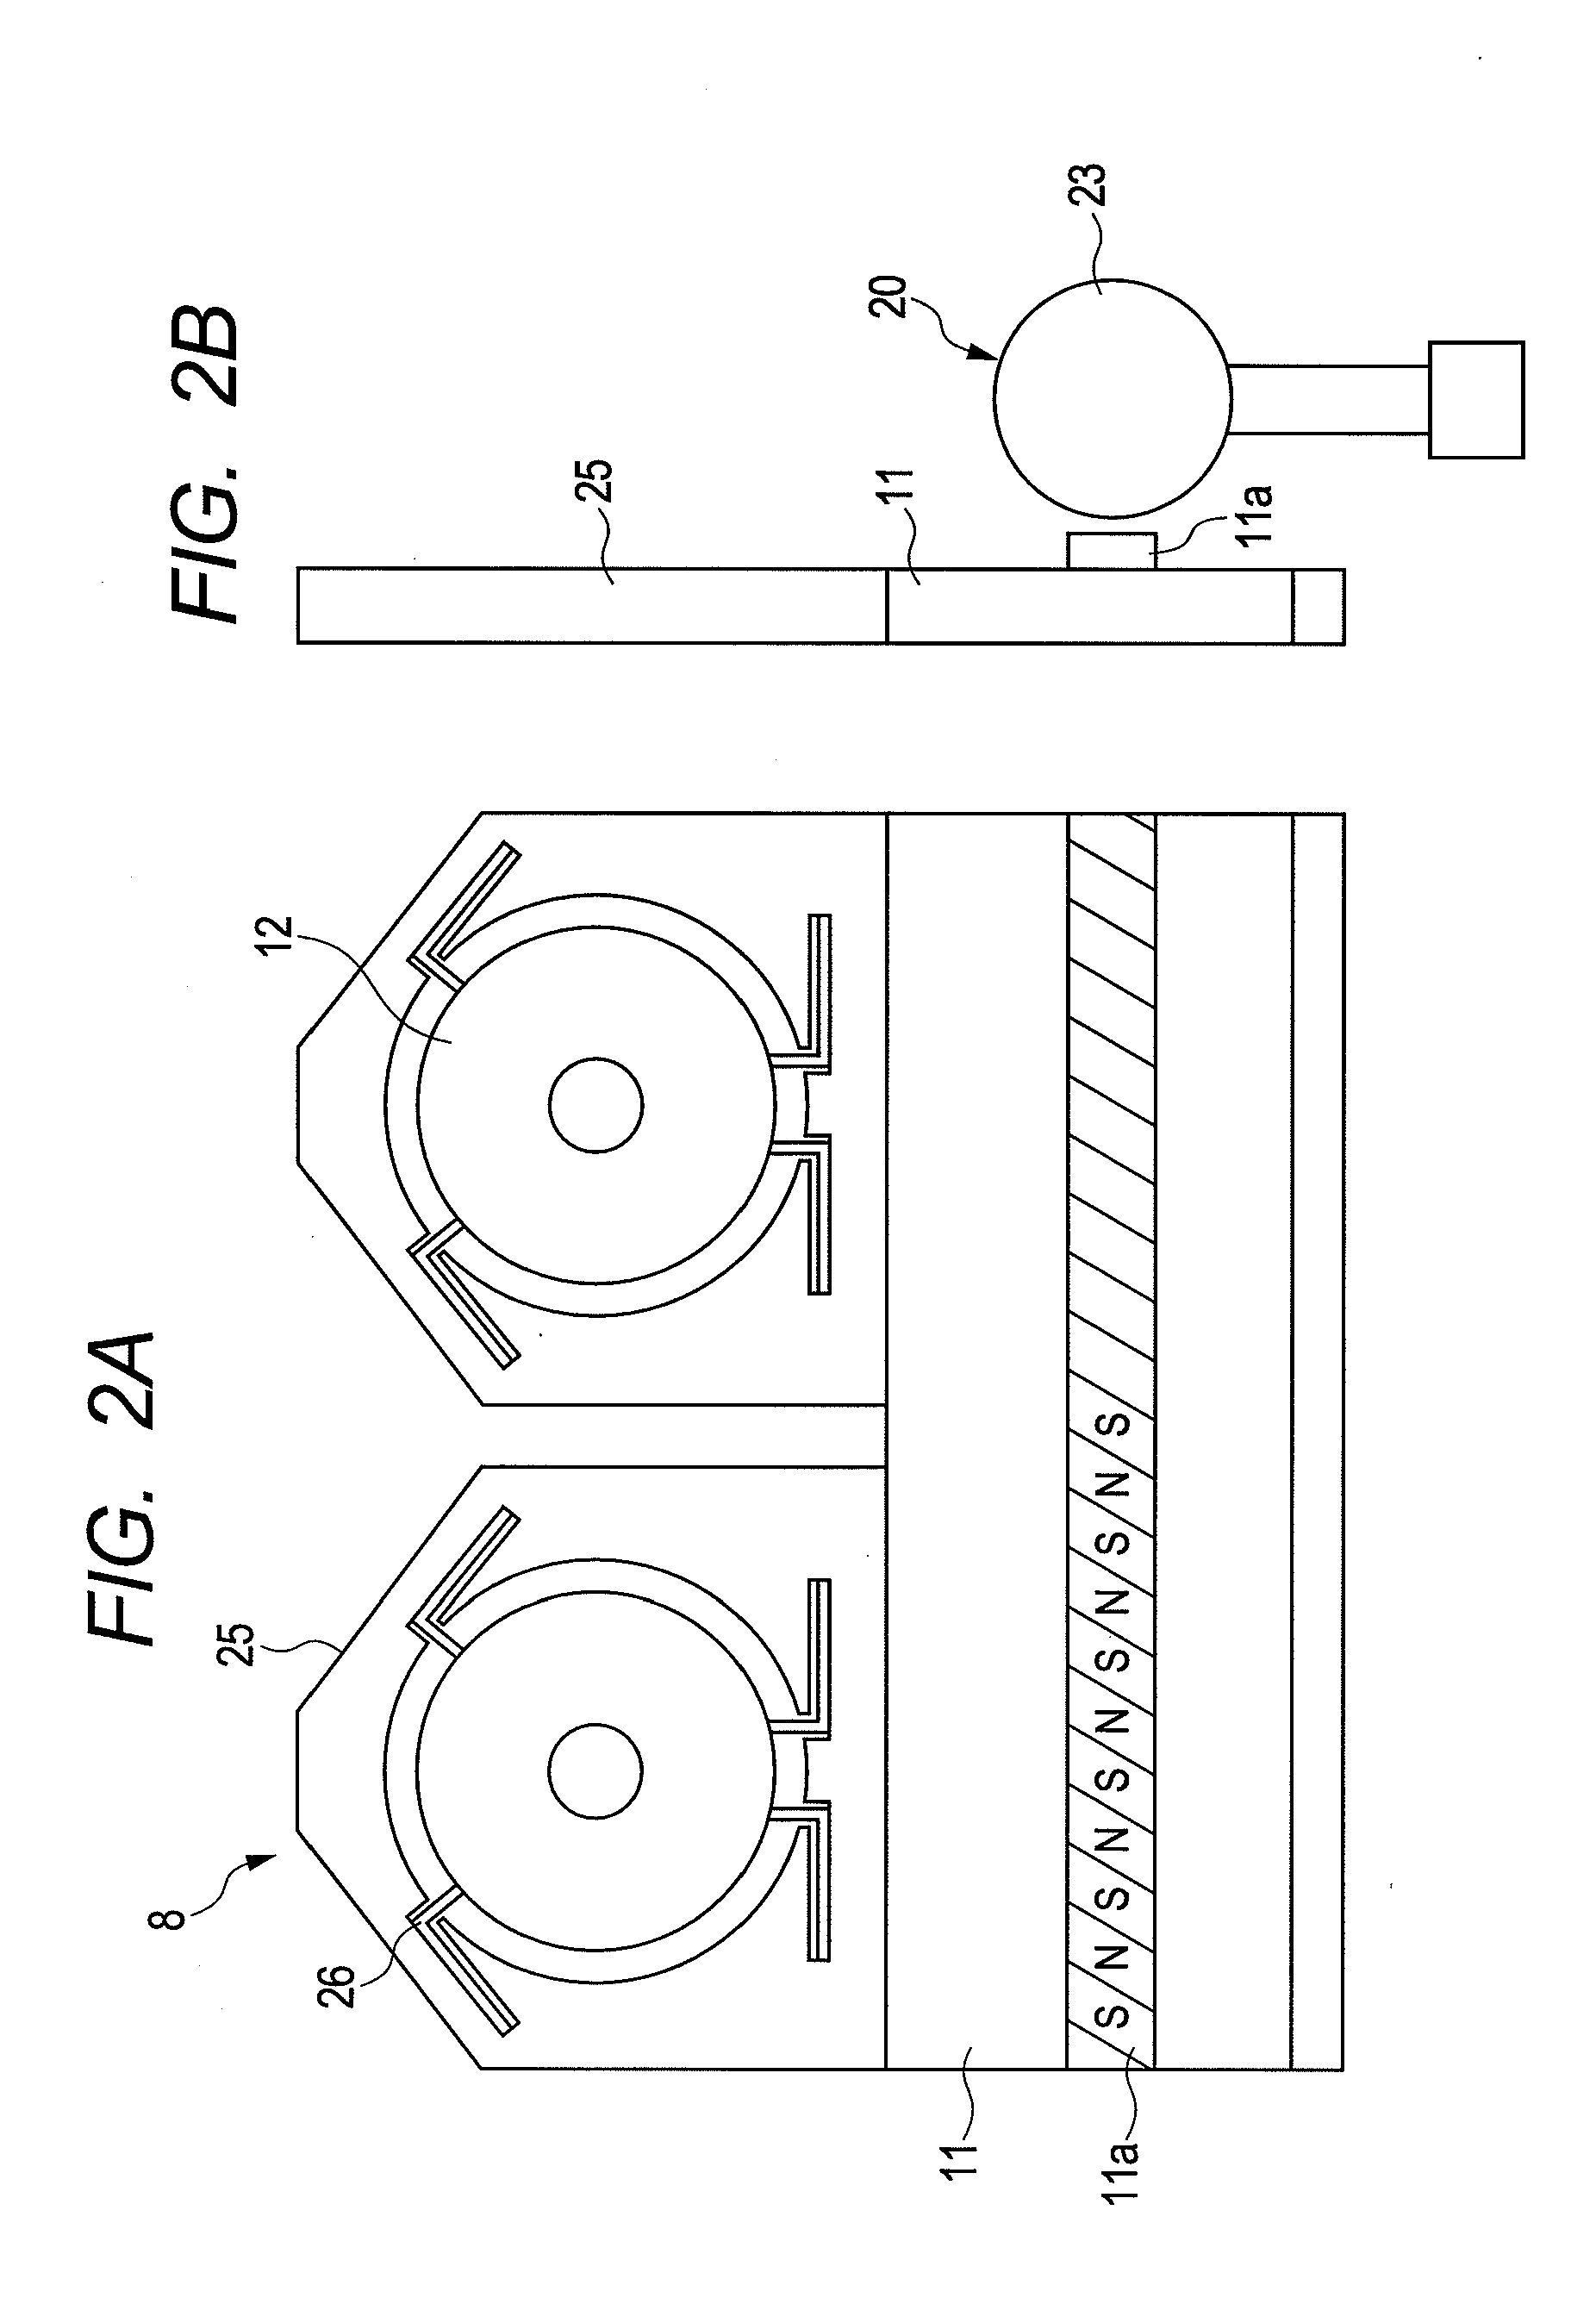 Substrate holder stocker device, substrate processing apparatus, and substrate holder moving method using the substrate holder stocker device